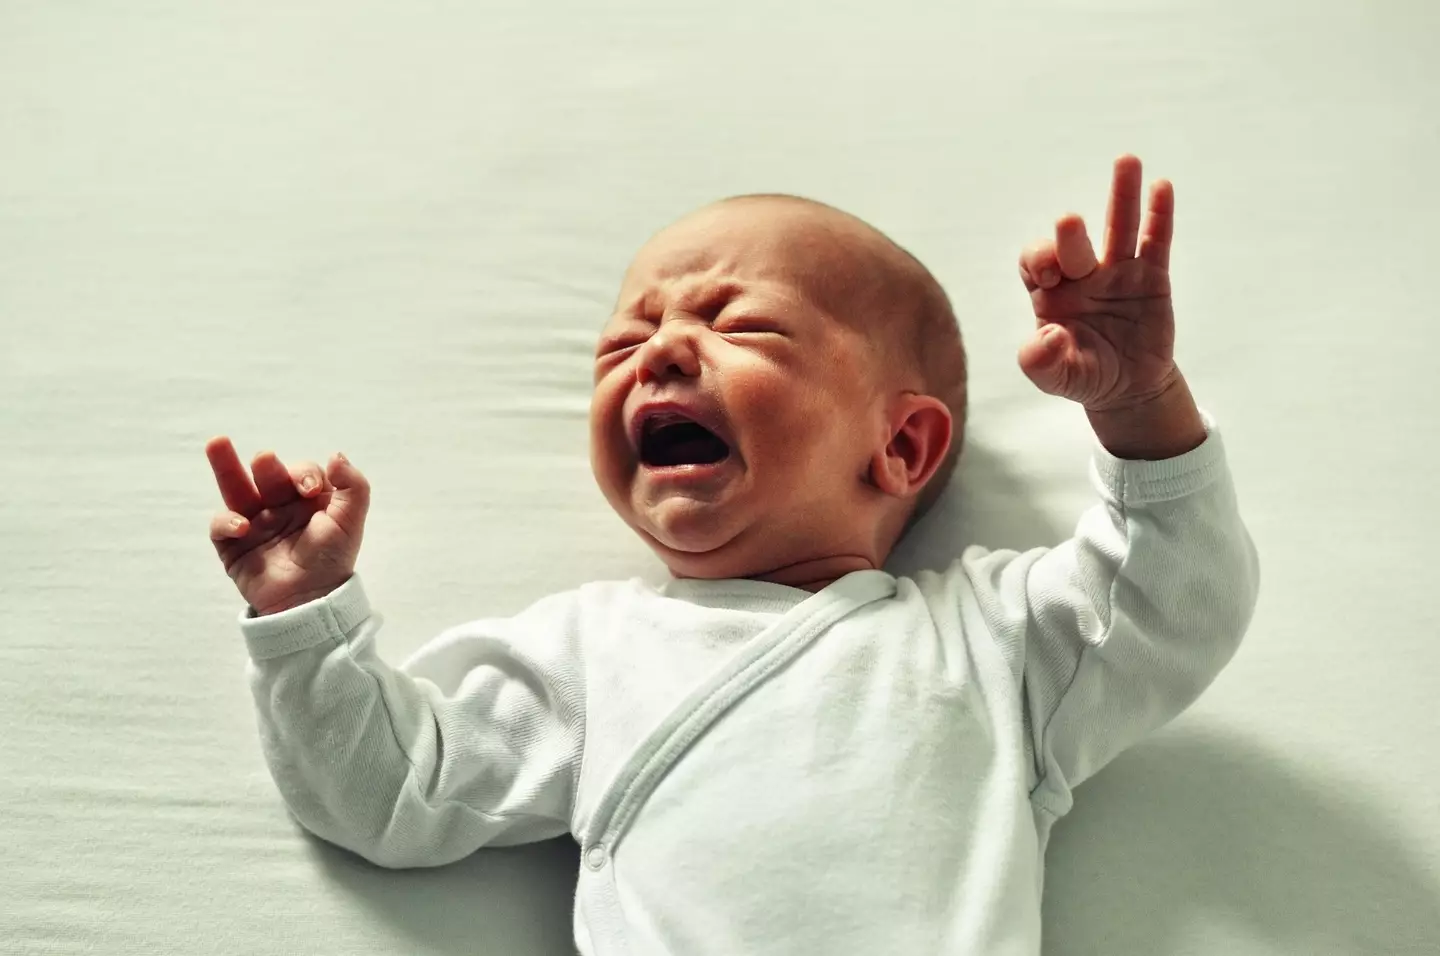 The 'cry it out' method has been a controversial topic in parenting for many years.